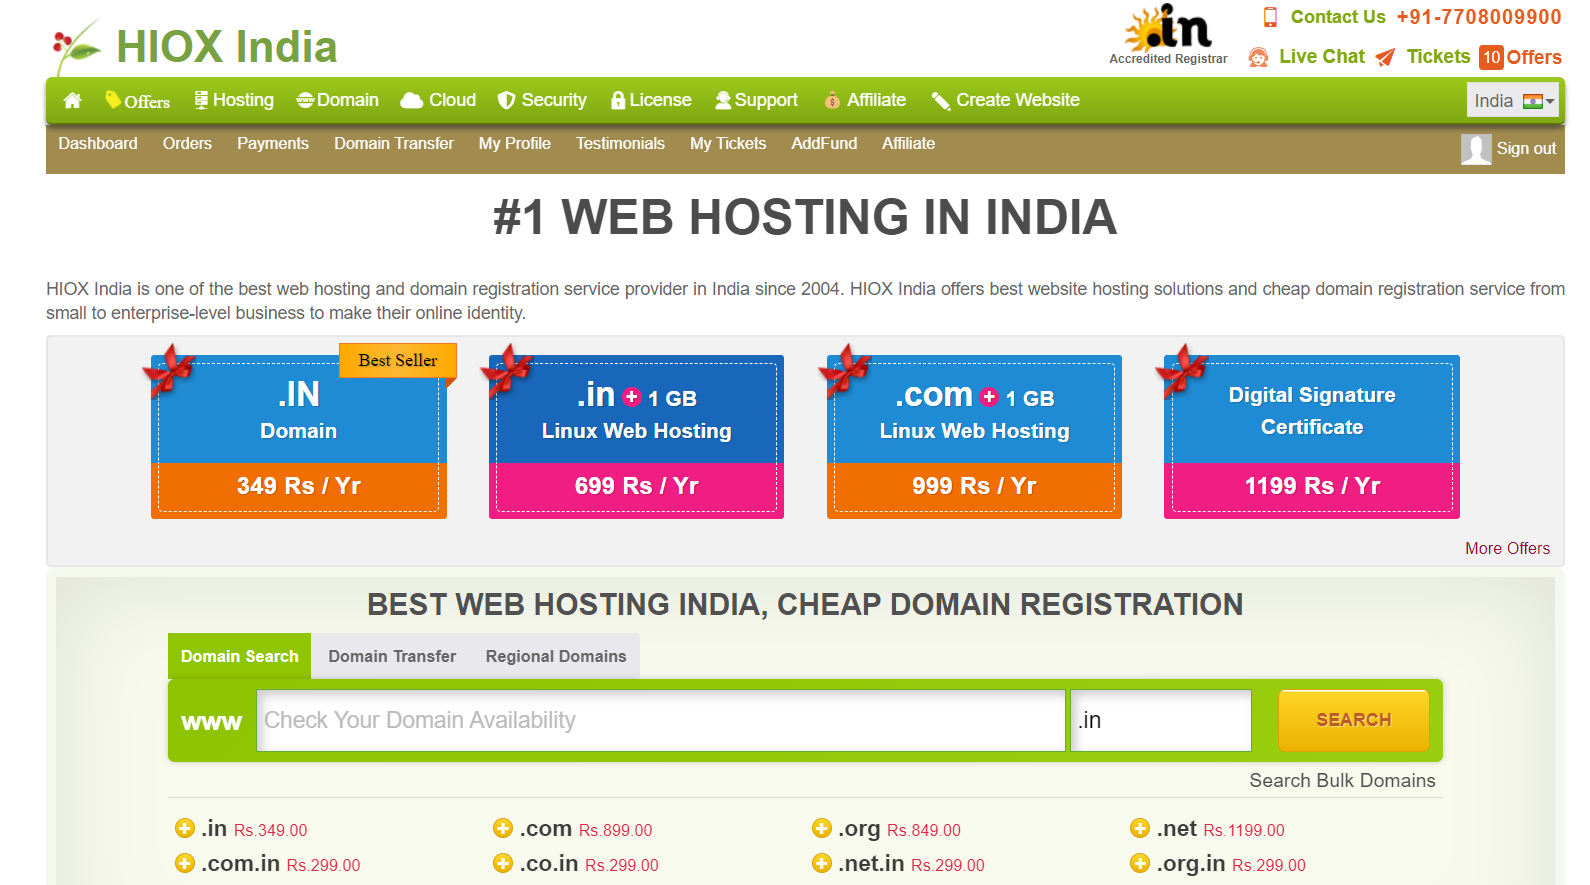 HIOX India: Your Go-to Web Hosting and Domain Registration Service Provider